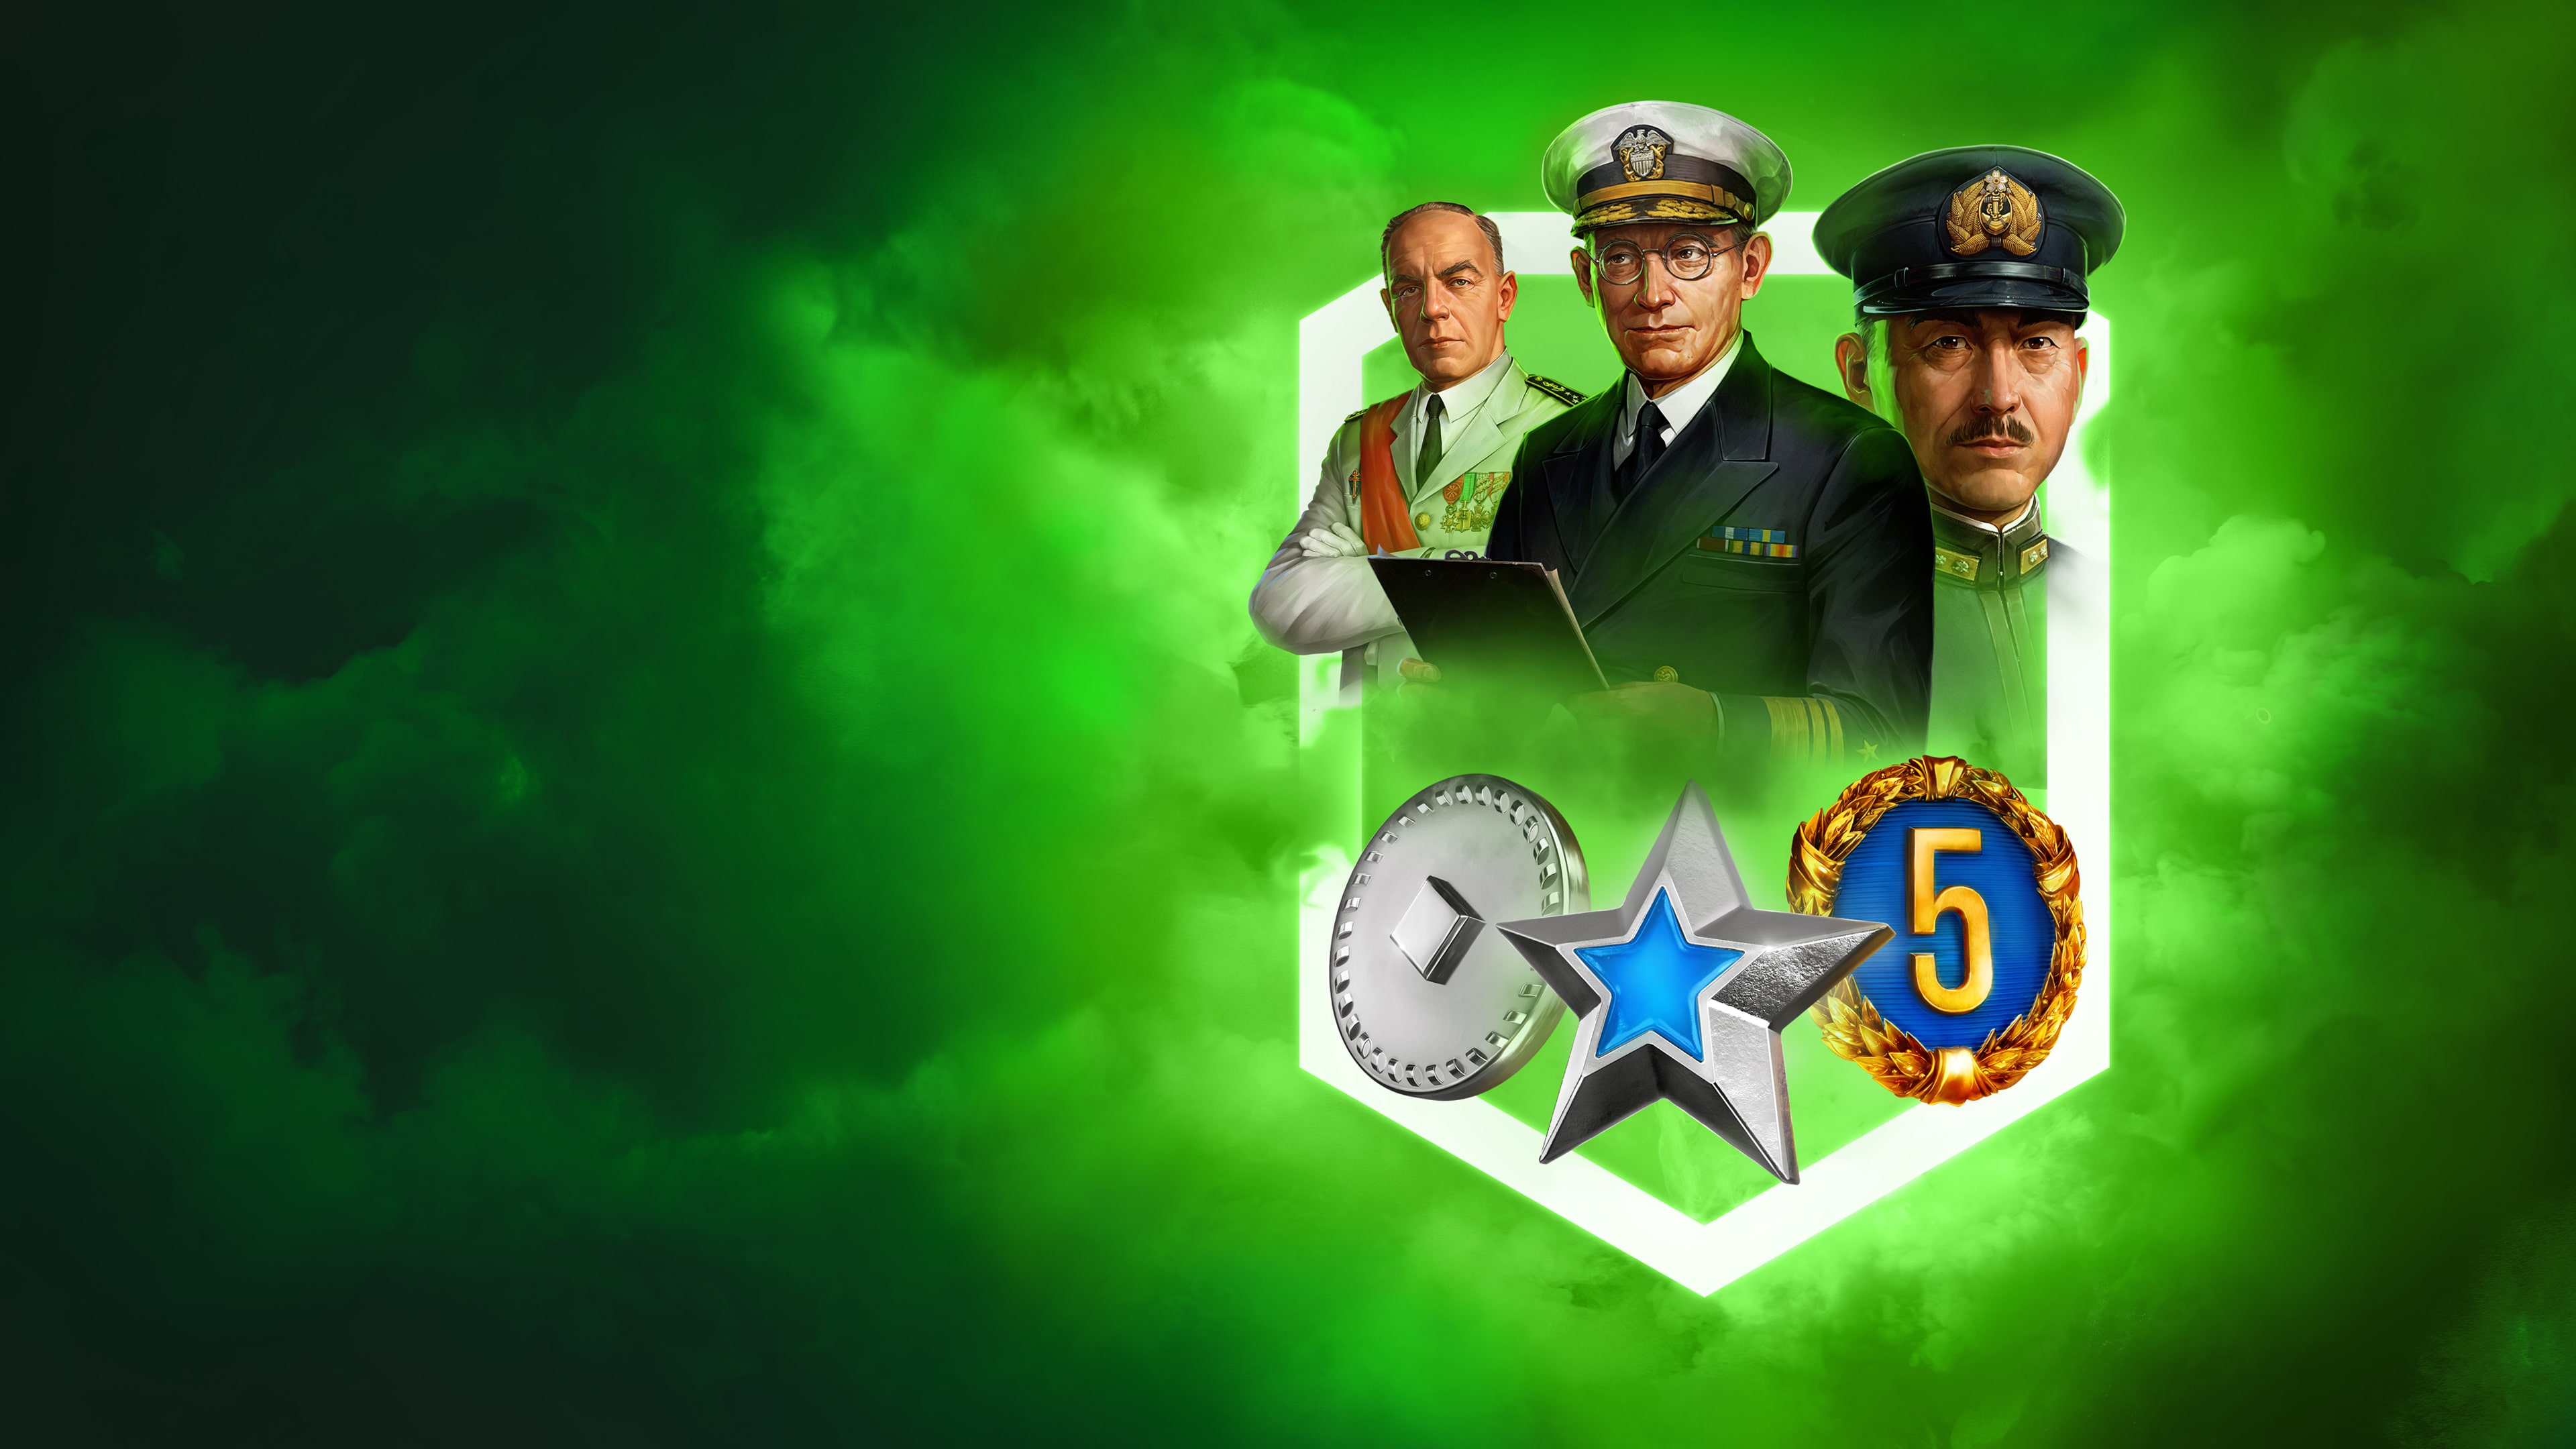 World of Warships: Legends – PS4™ Suite du capitaine